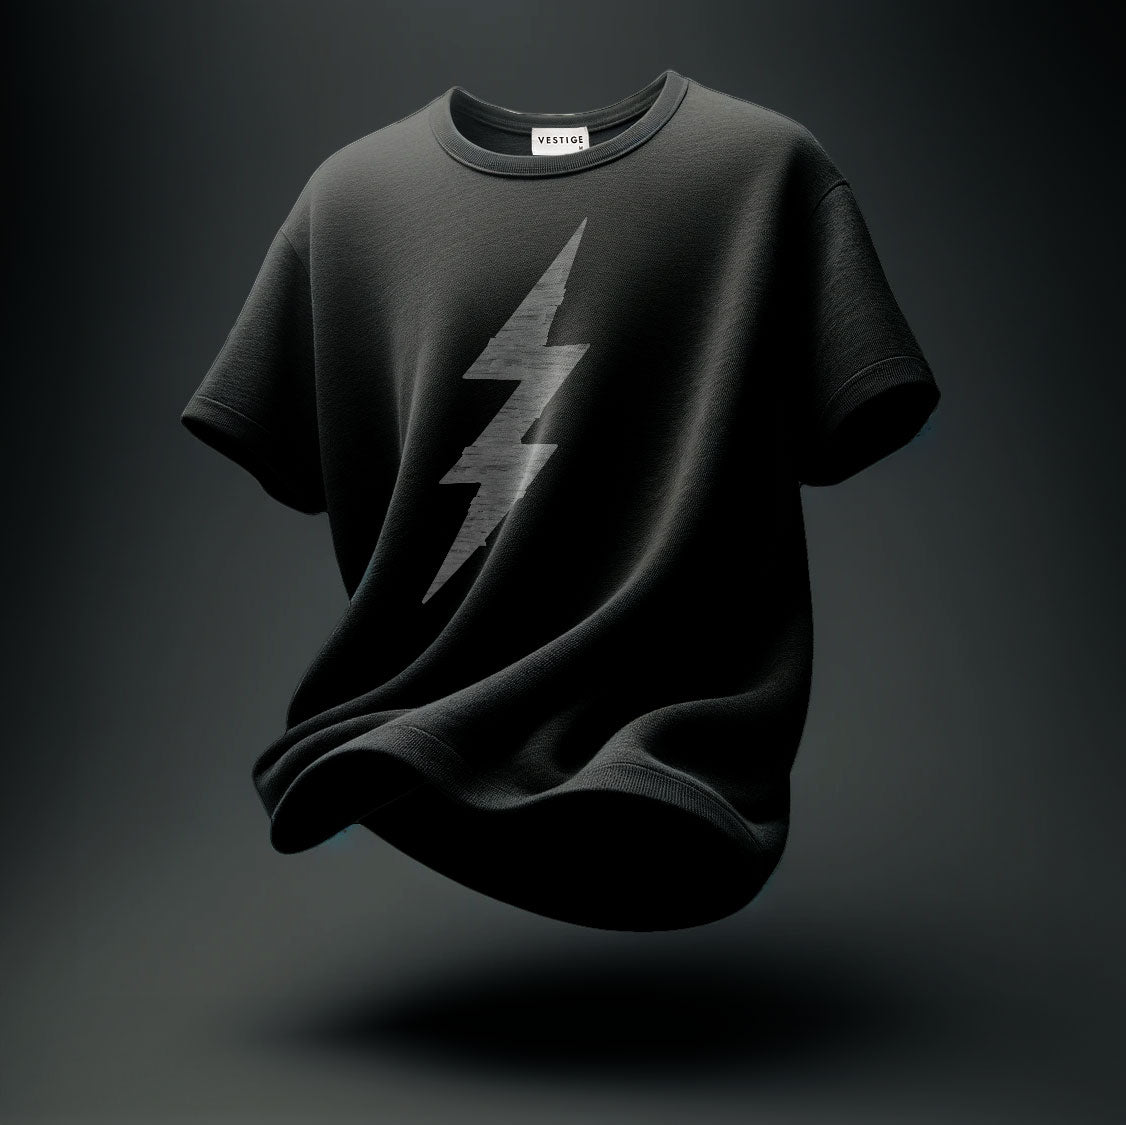 VESTIGE. Graphic Tees and Apparel for Men and Women.